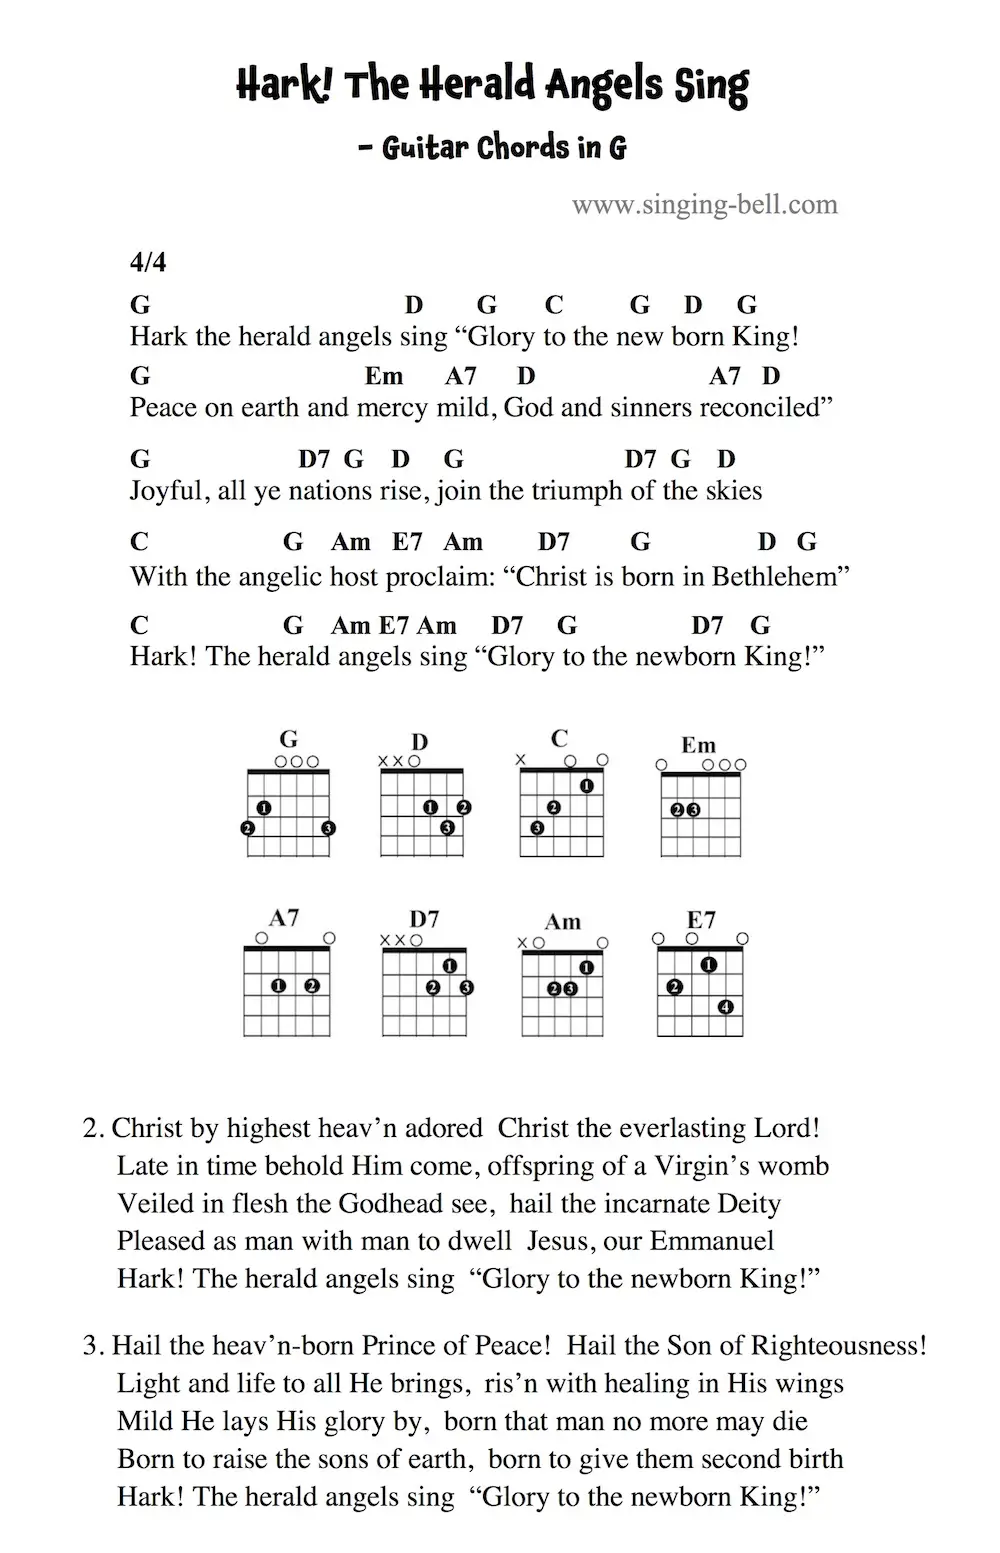 Hark! The Herald Angels Sing - Guitar Chords and Tabs in G.